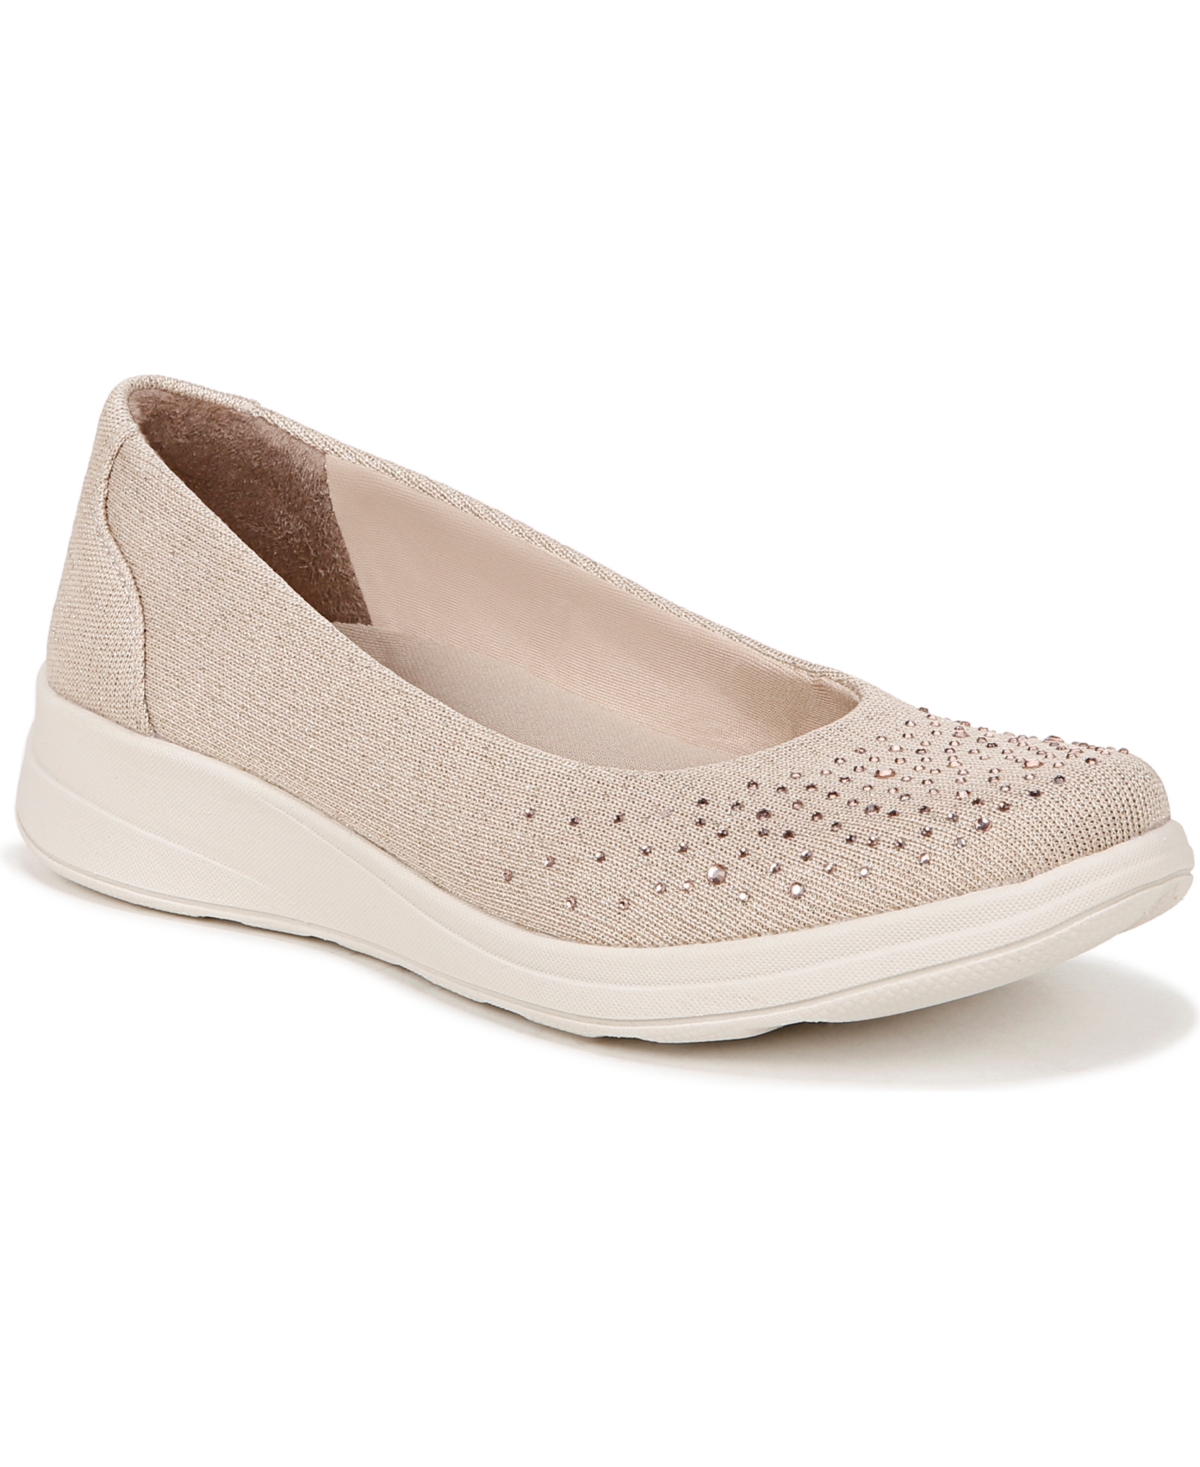 Golden Bright Washable Slip Ons - Beige Sparkle Knit Fabric